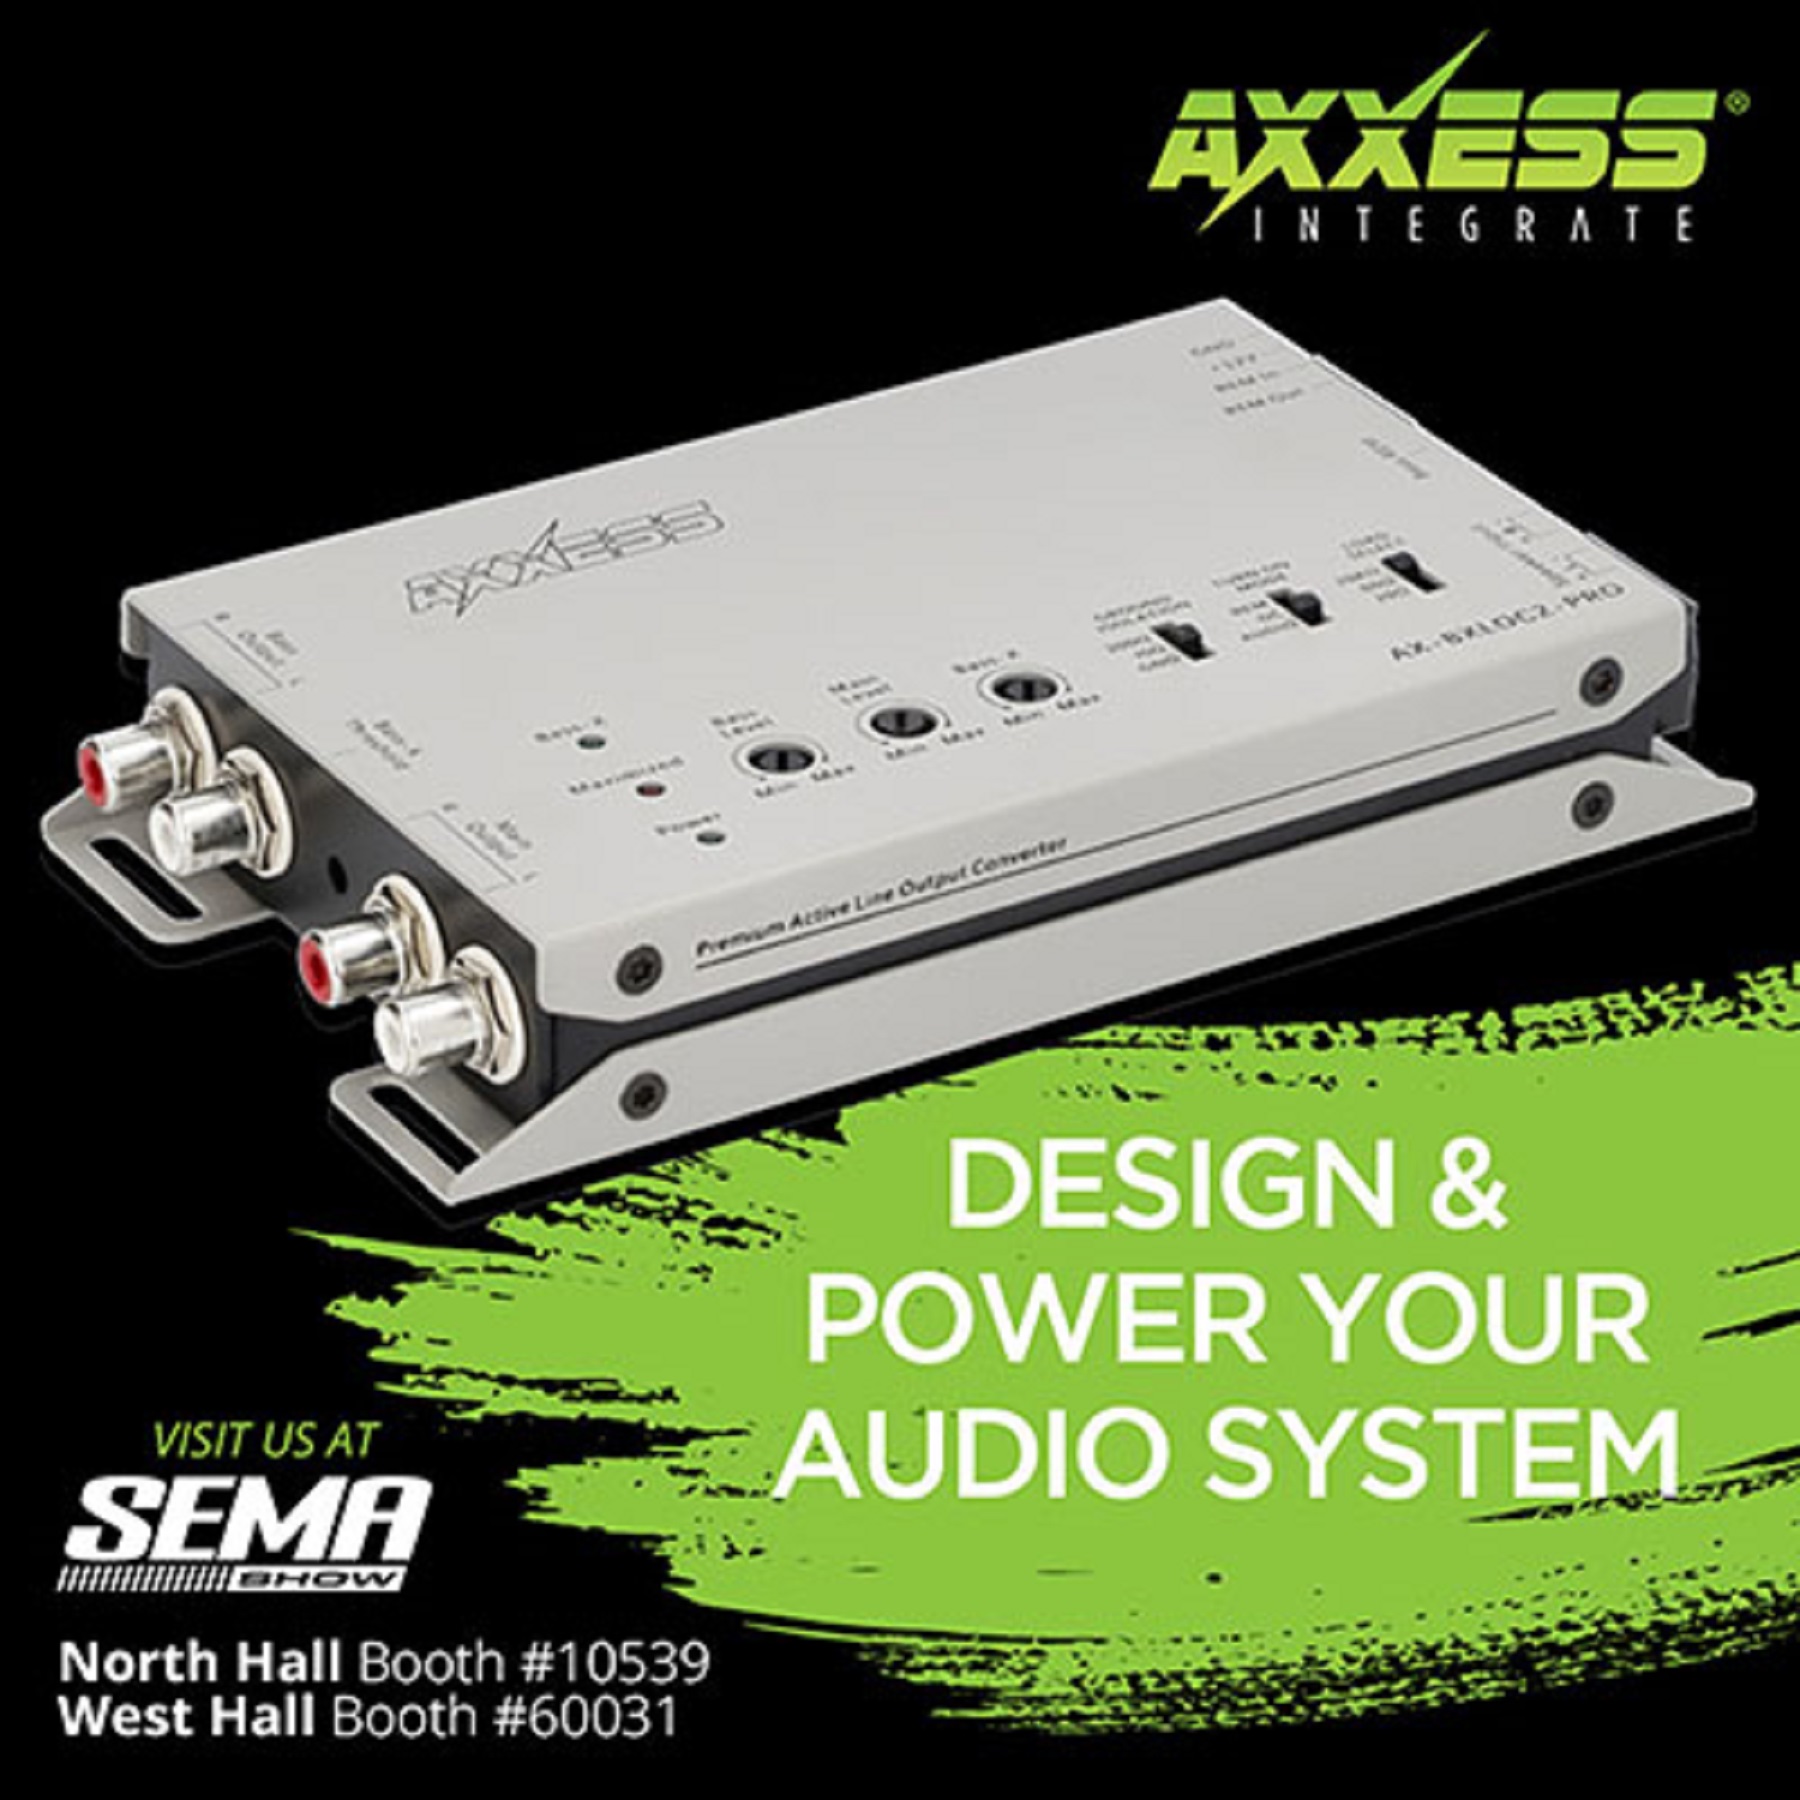 New Axxess® Line Output Converters and Accessories Debut at SEMA